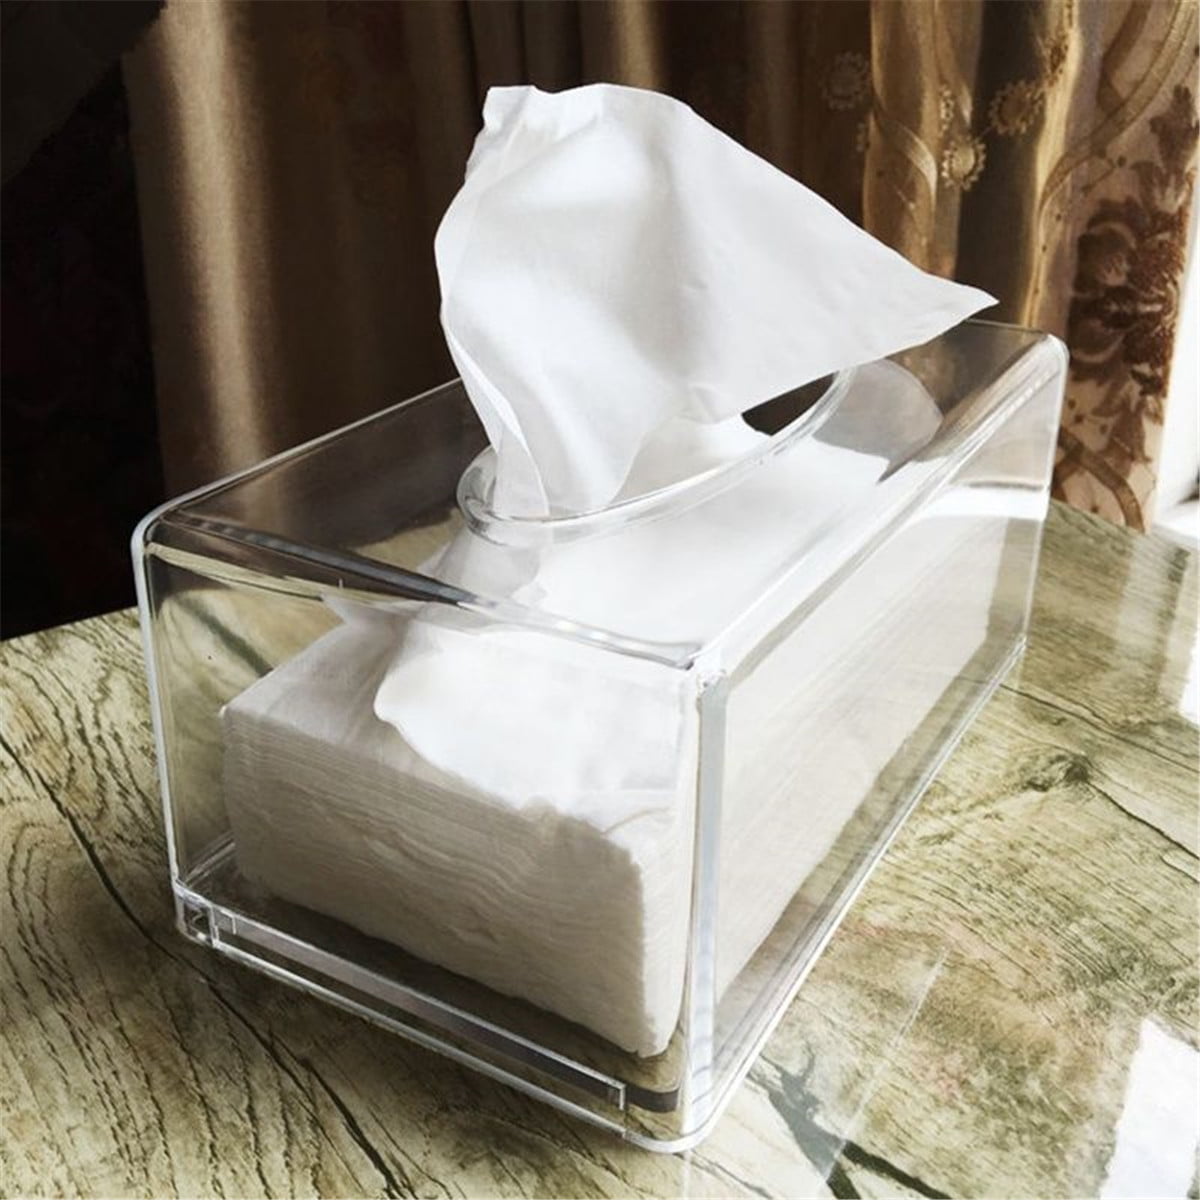 Details about    Home Hotel Tissue Box Cover Paper Napkin Holder Storage Case le 